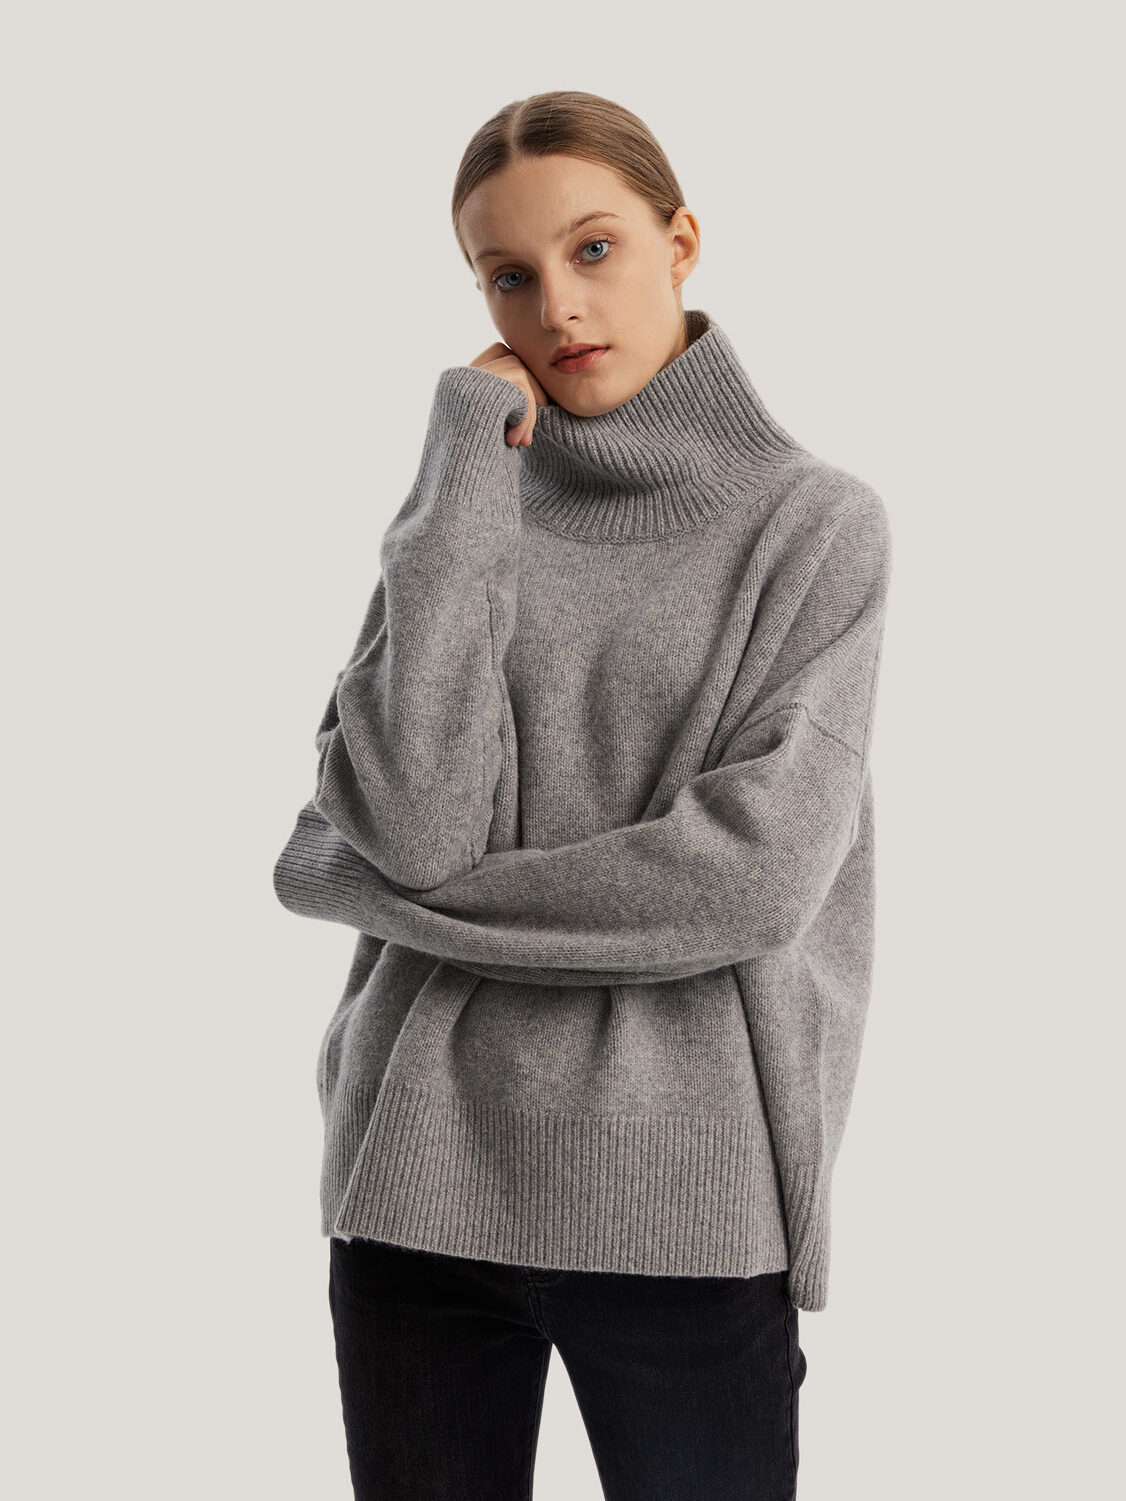 A model wearing a grey oversized cashmere sweater from Gentle Herd.